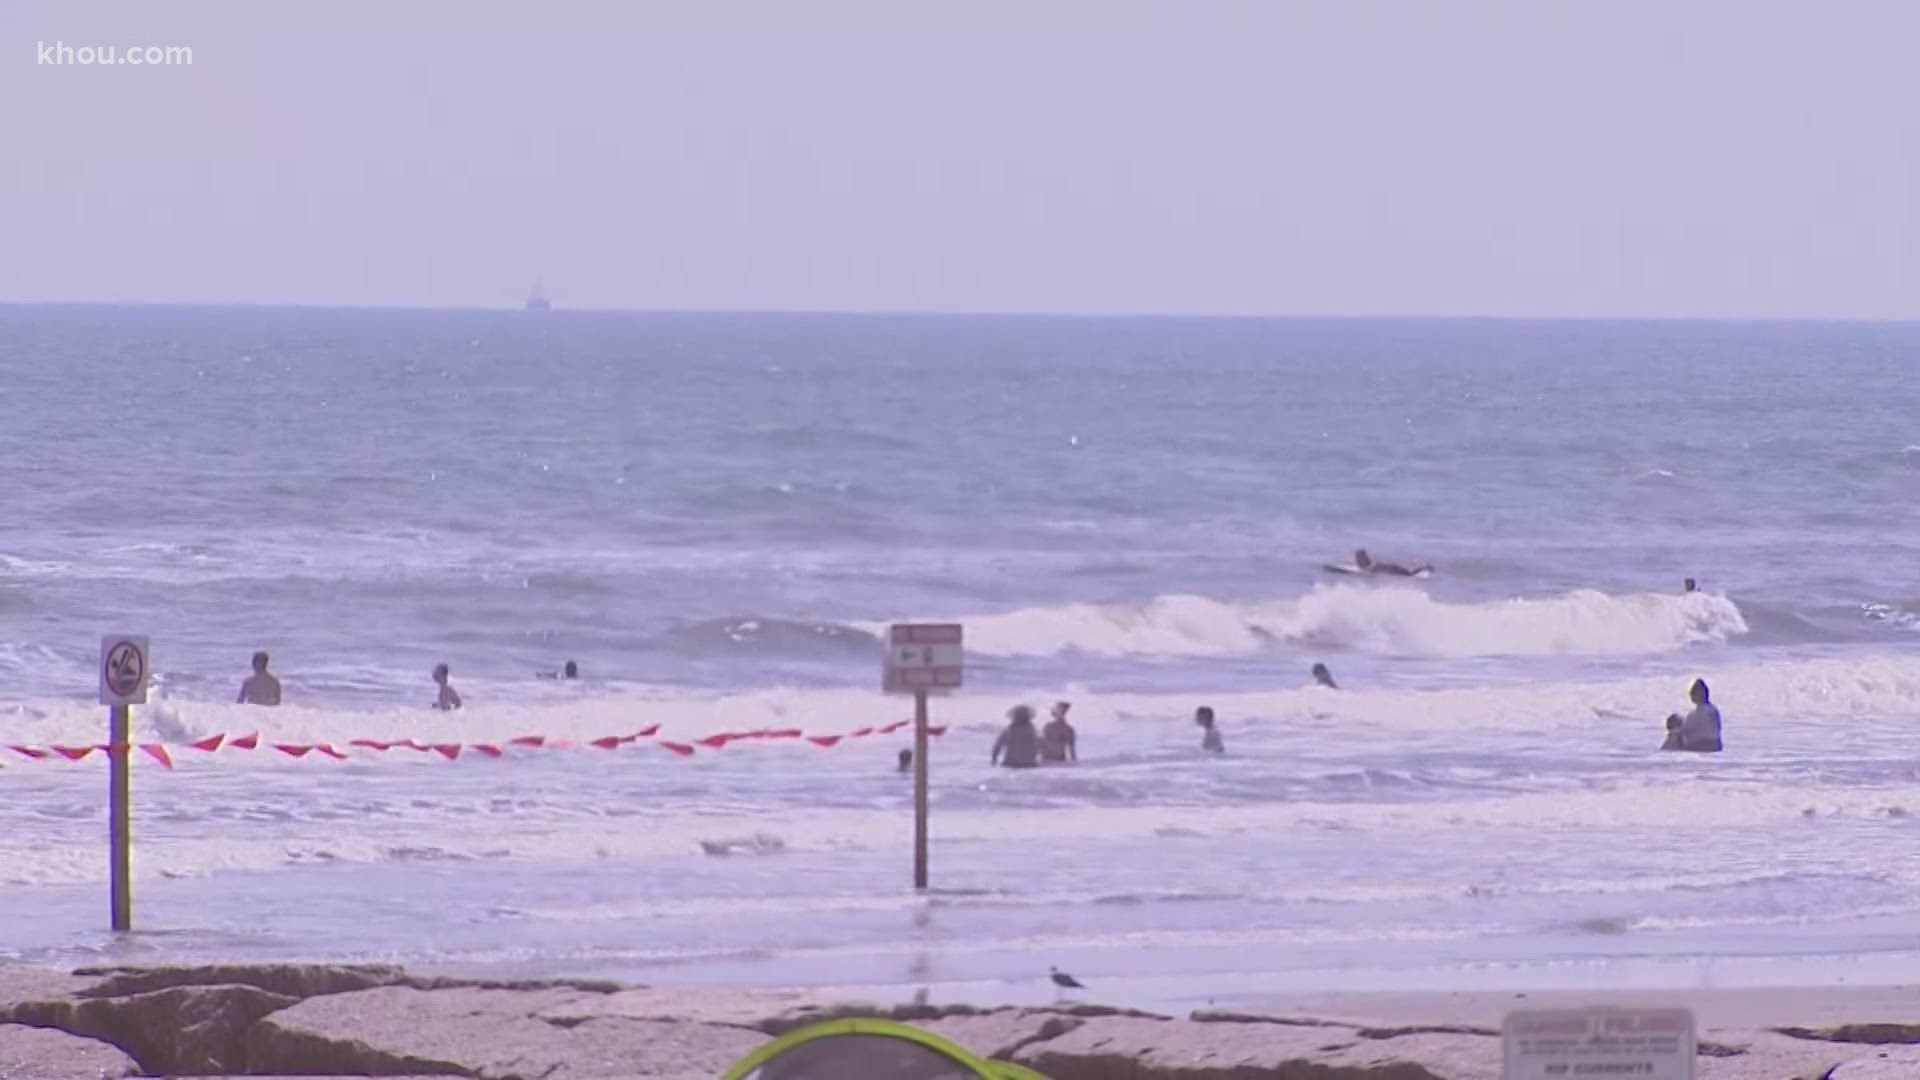 Galveston Beach Patrol has a stern warning for swimmers after three drownings occurred during the Labor Day weekend.